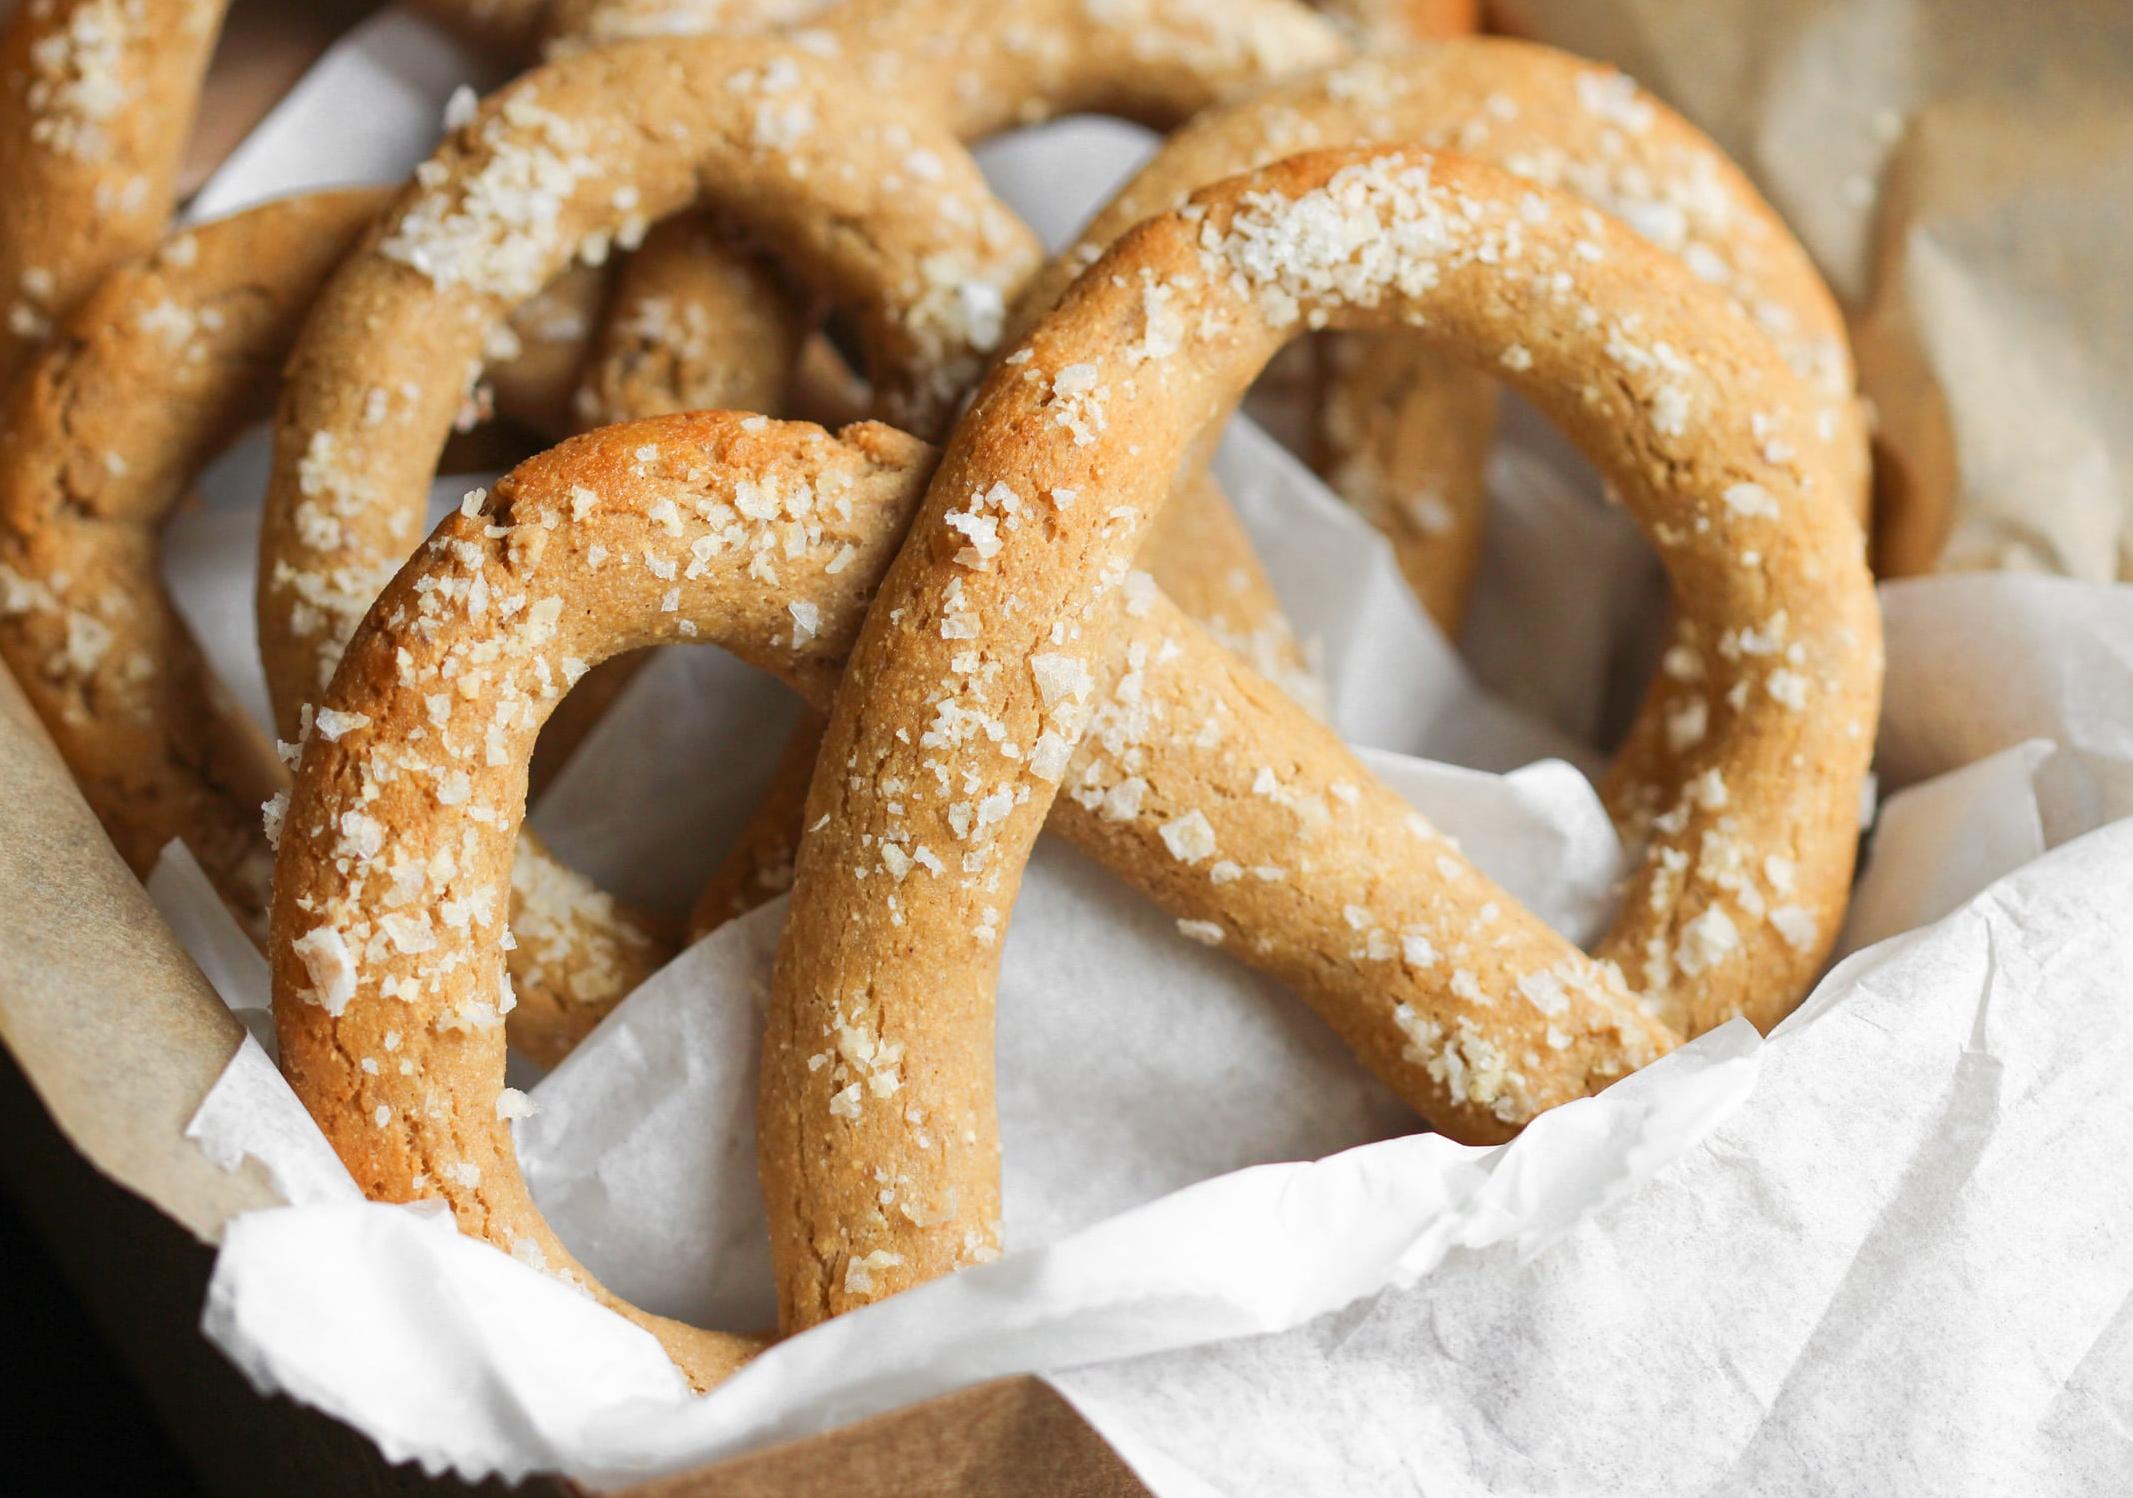  These homemade soft pretzels are a healthier and more ethical choice than their traditional counterparts, and they taste even better!